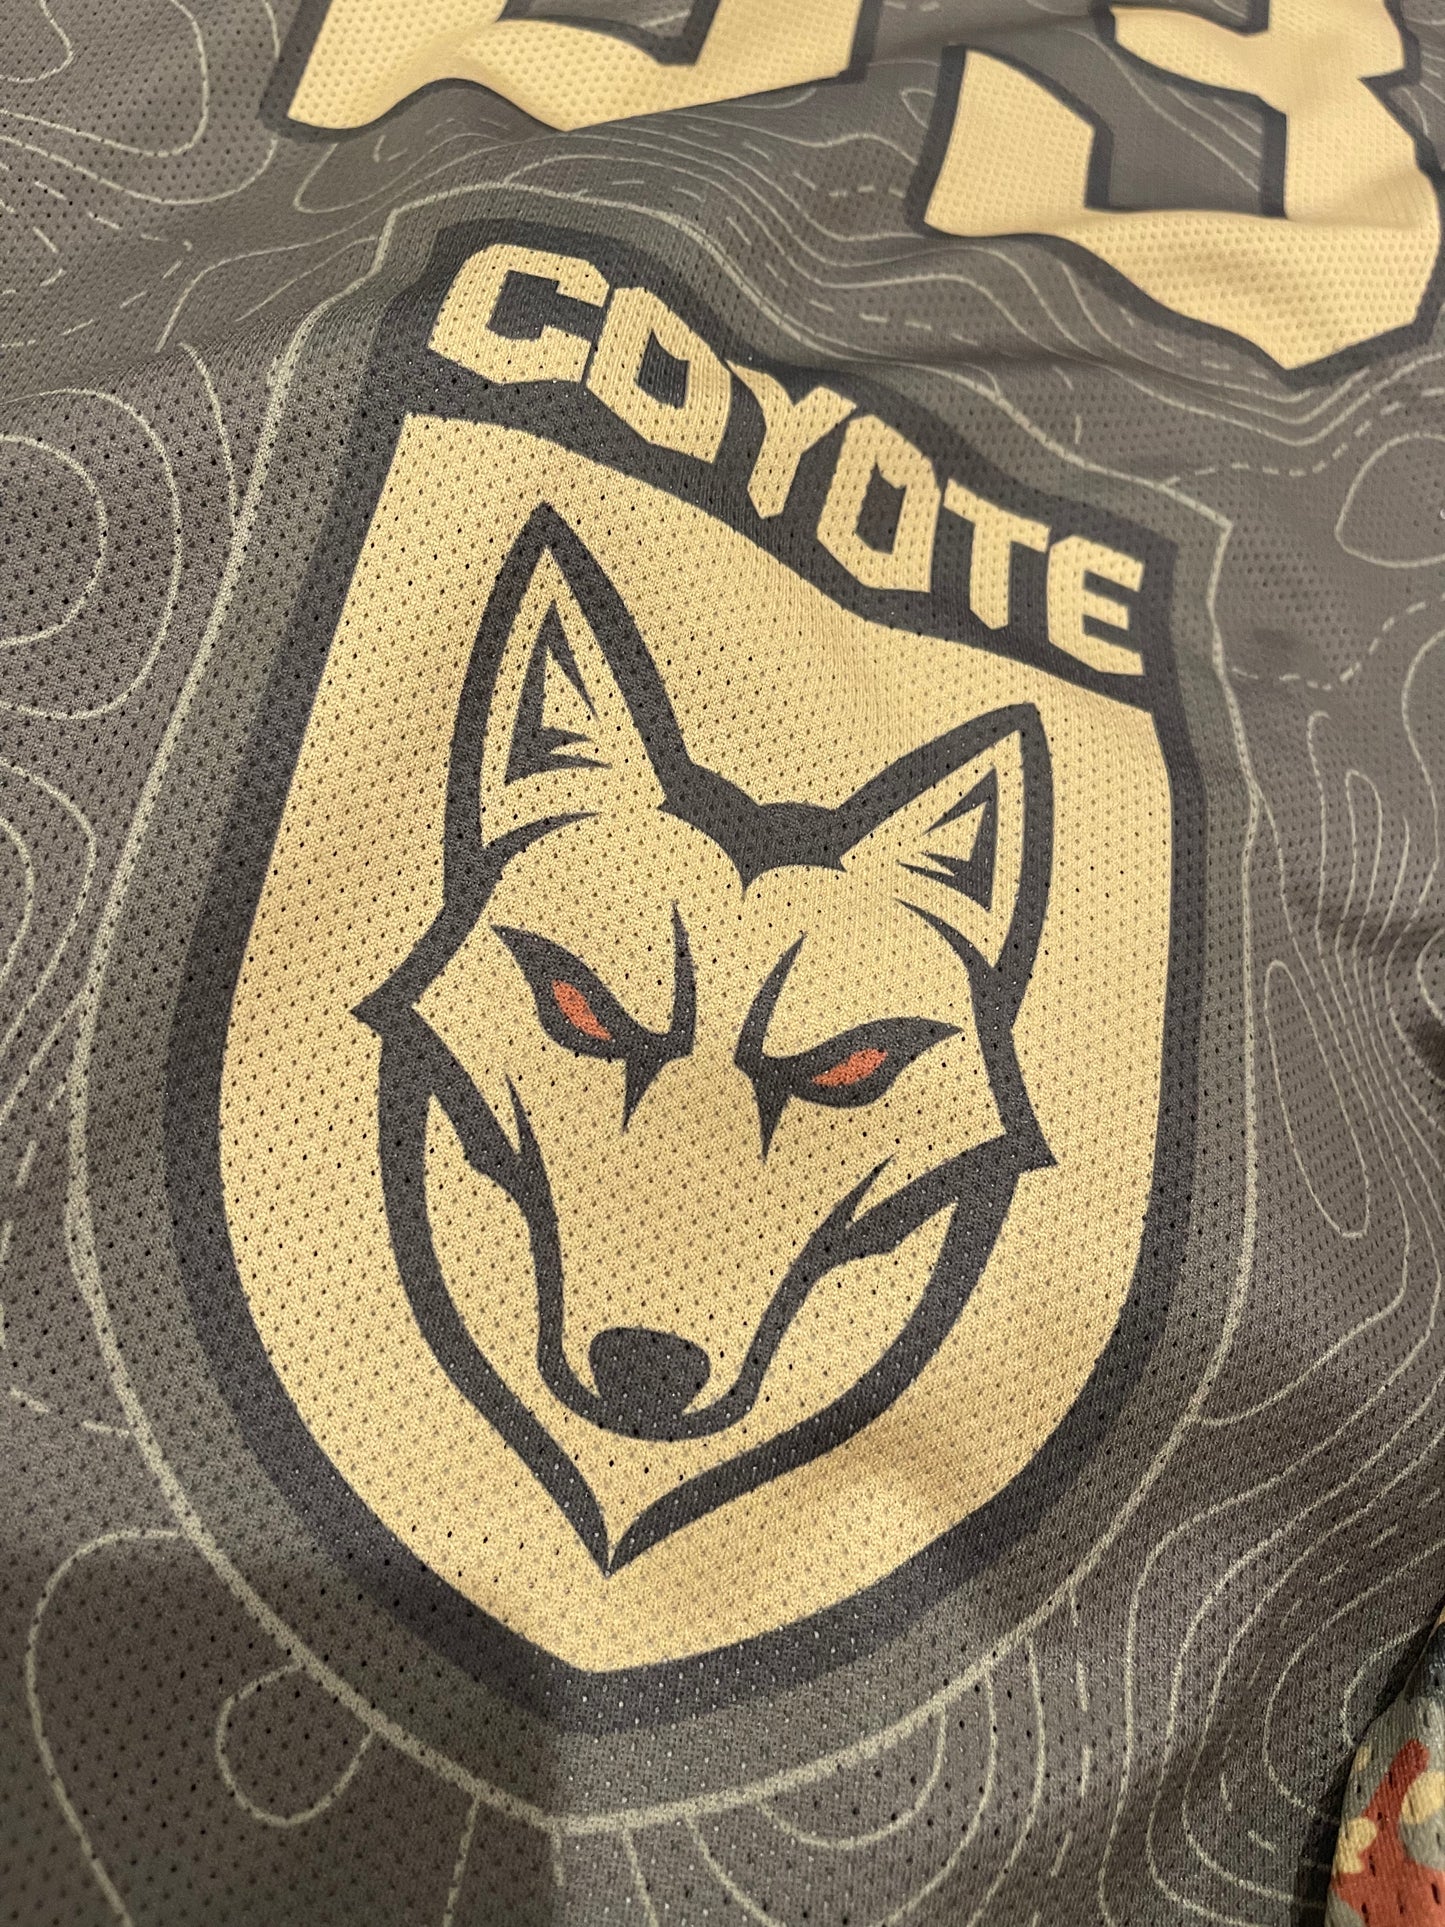 Coyote Jersey